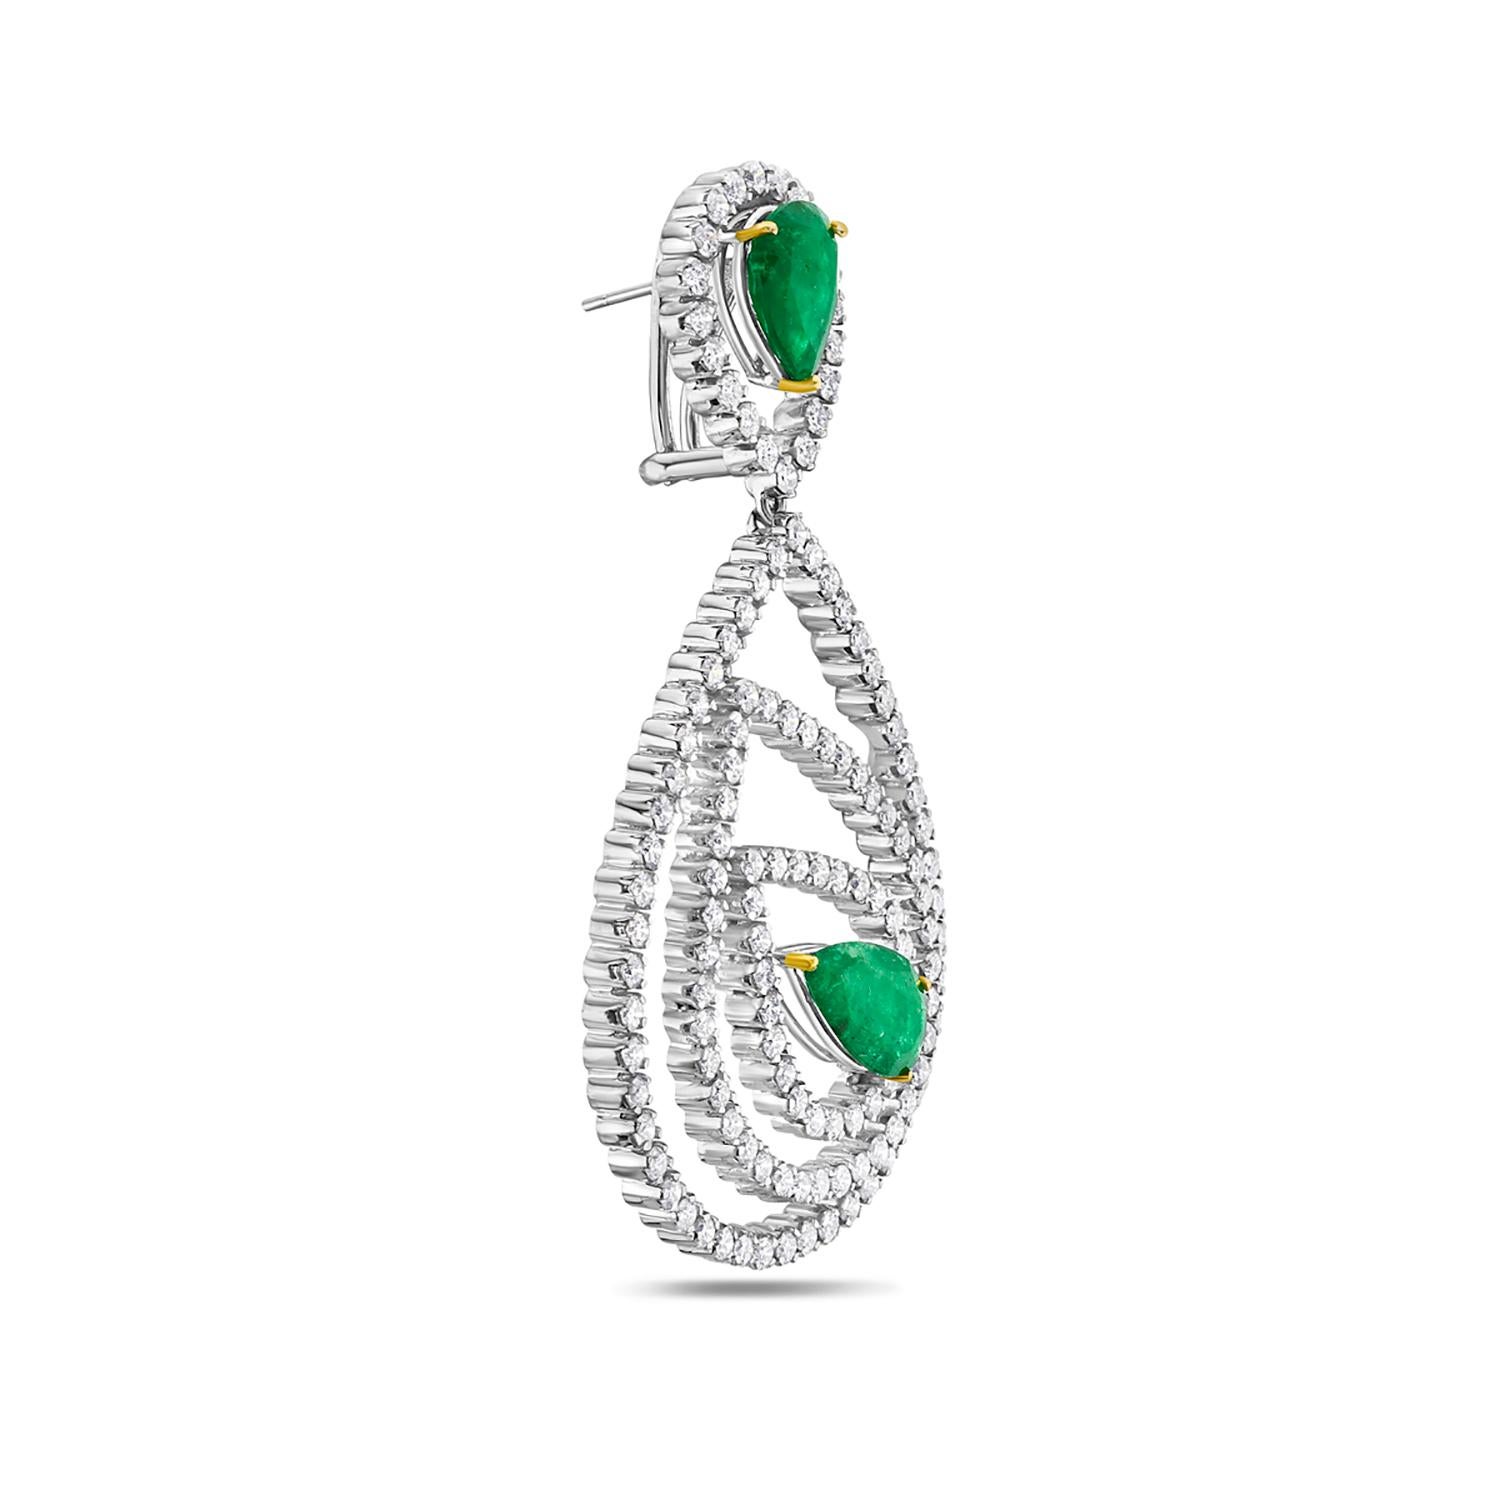 Enhance your jewelry collection with these breathtaking Pear-shaped Emerald Earrings caged in sparkling diamonds set in 18K white gold. Perfect for any special occasion, this timeless design is sure to add sophistication to any outfit. Shop now and